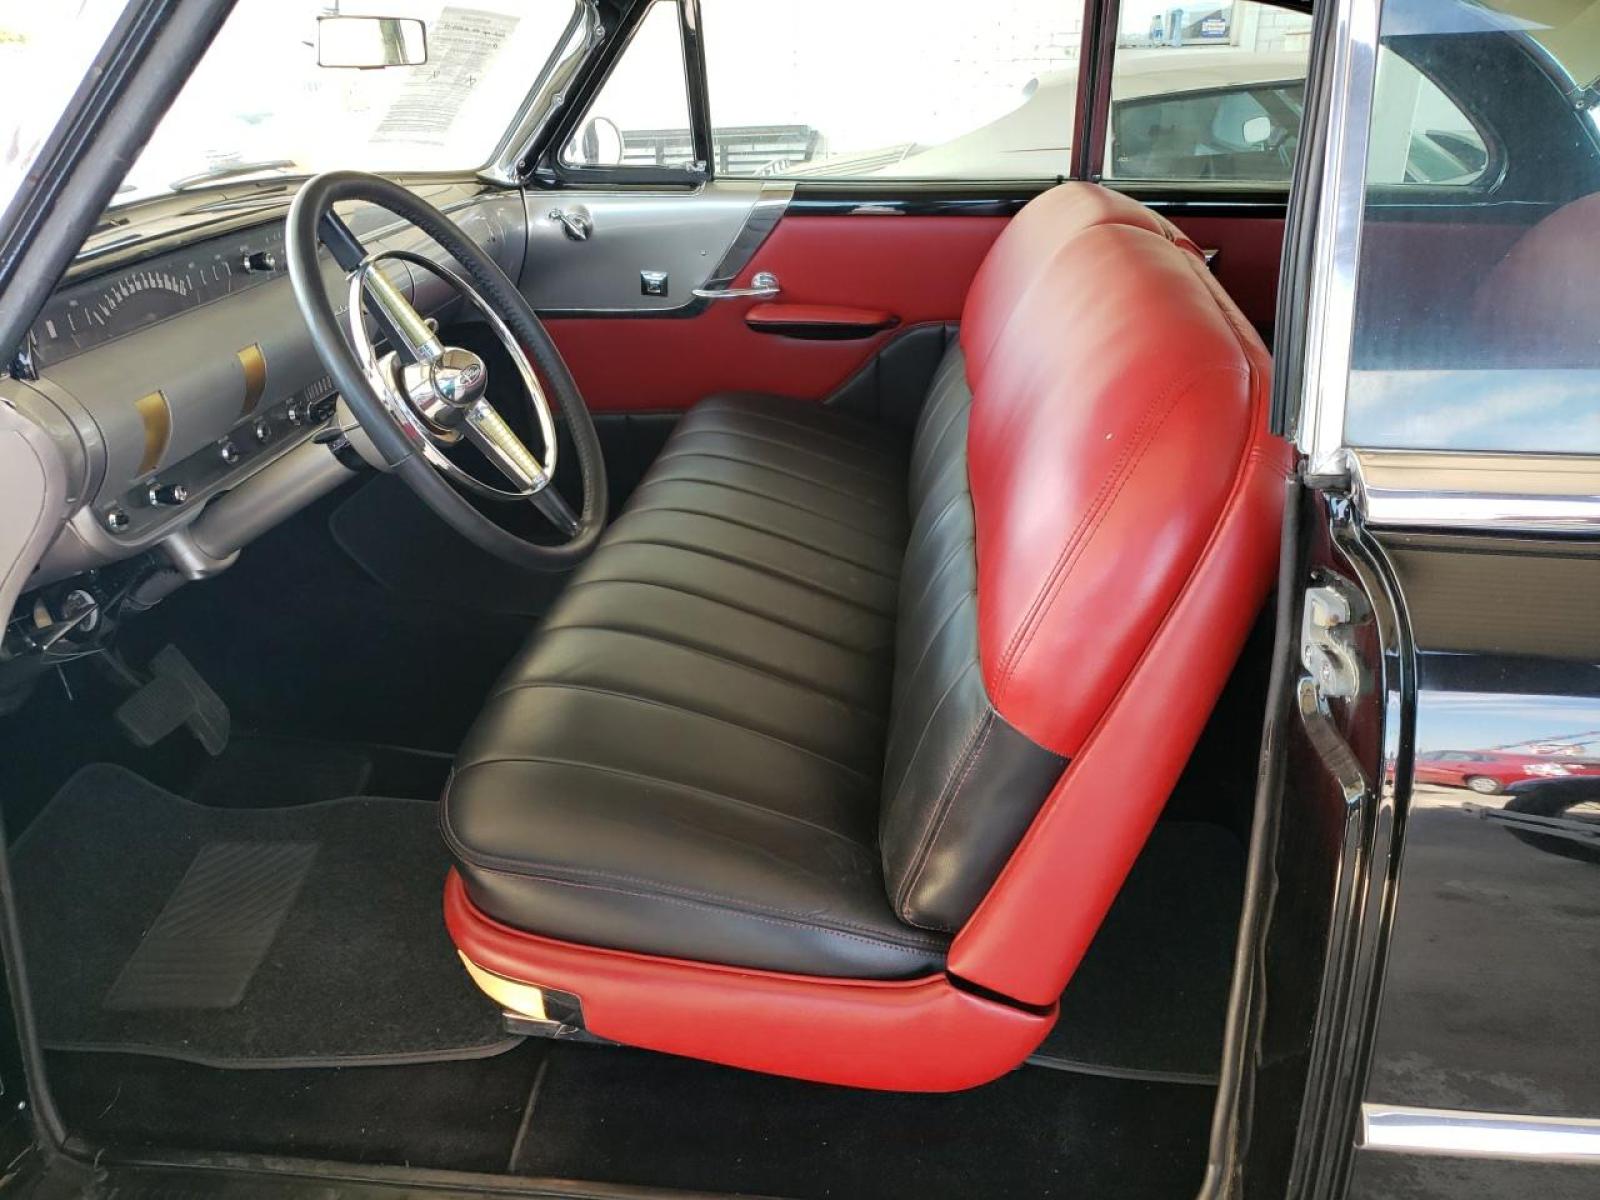 1953 Black /Red Lincoln Capri (53LA7562H) , Automatic transmission, located at 1687 Business 35 S, New Braunfels, TX, 78130, (830) 625-7159, 29.655487, -98.051491 - Check this out! This 1953 Lincoln Capri is ready for it's new home. Over $60,000.00 restoration with a rebuilt 351 M V8 engine. Power windows, power locks, and a South Texas car, so forget about the rust. The chrome bumpers aren't up to car show quality, but great for everyday driving. Under 10,000 - Photo #3